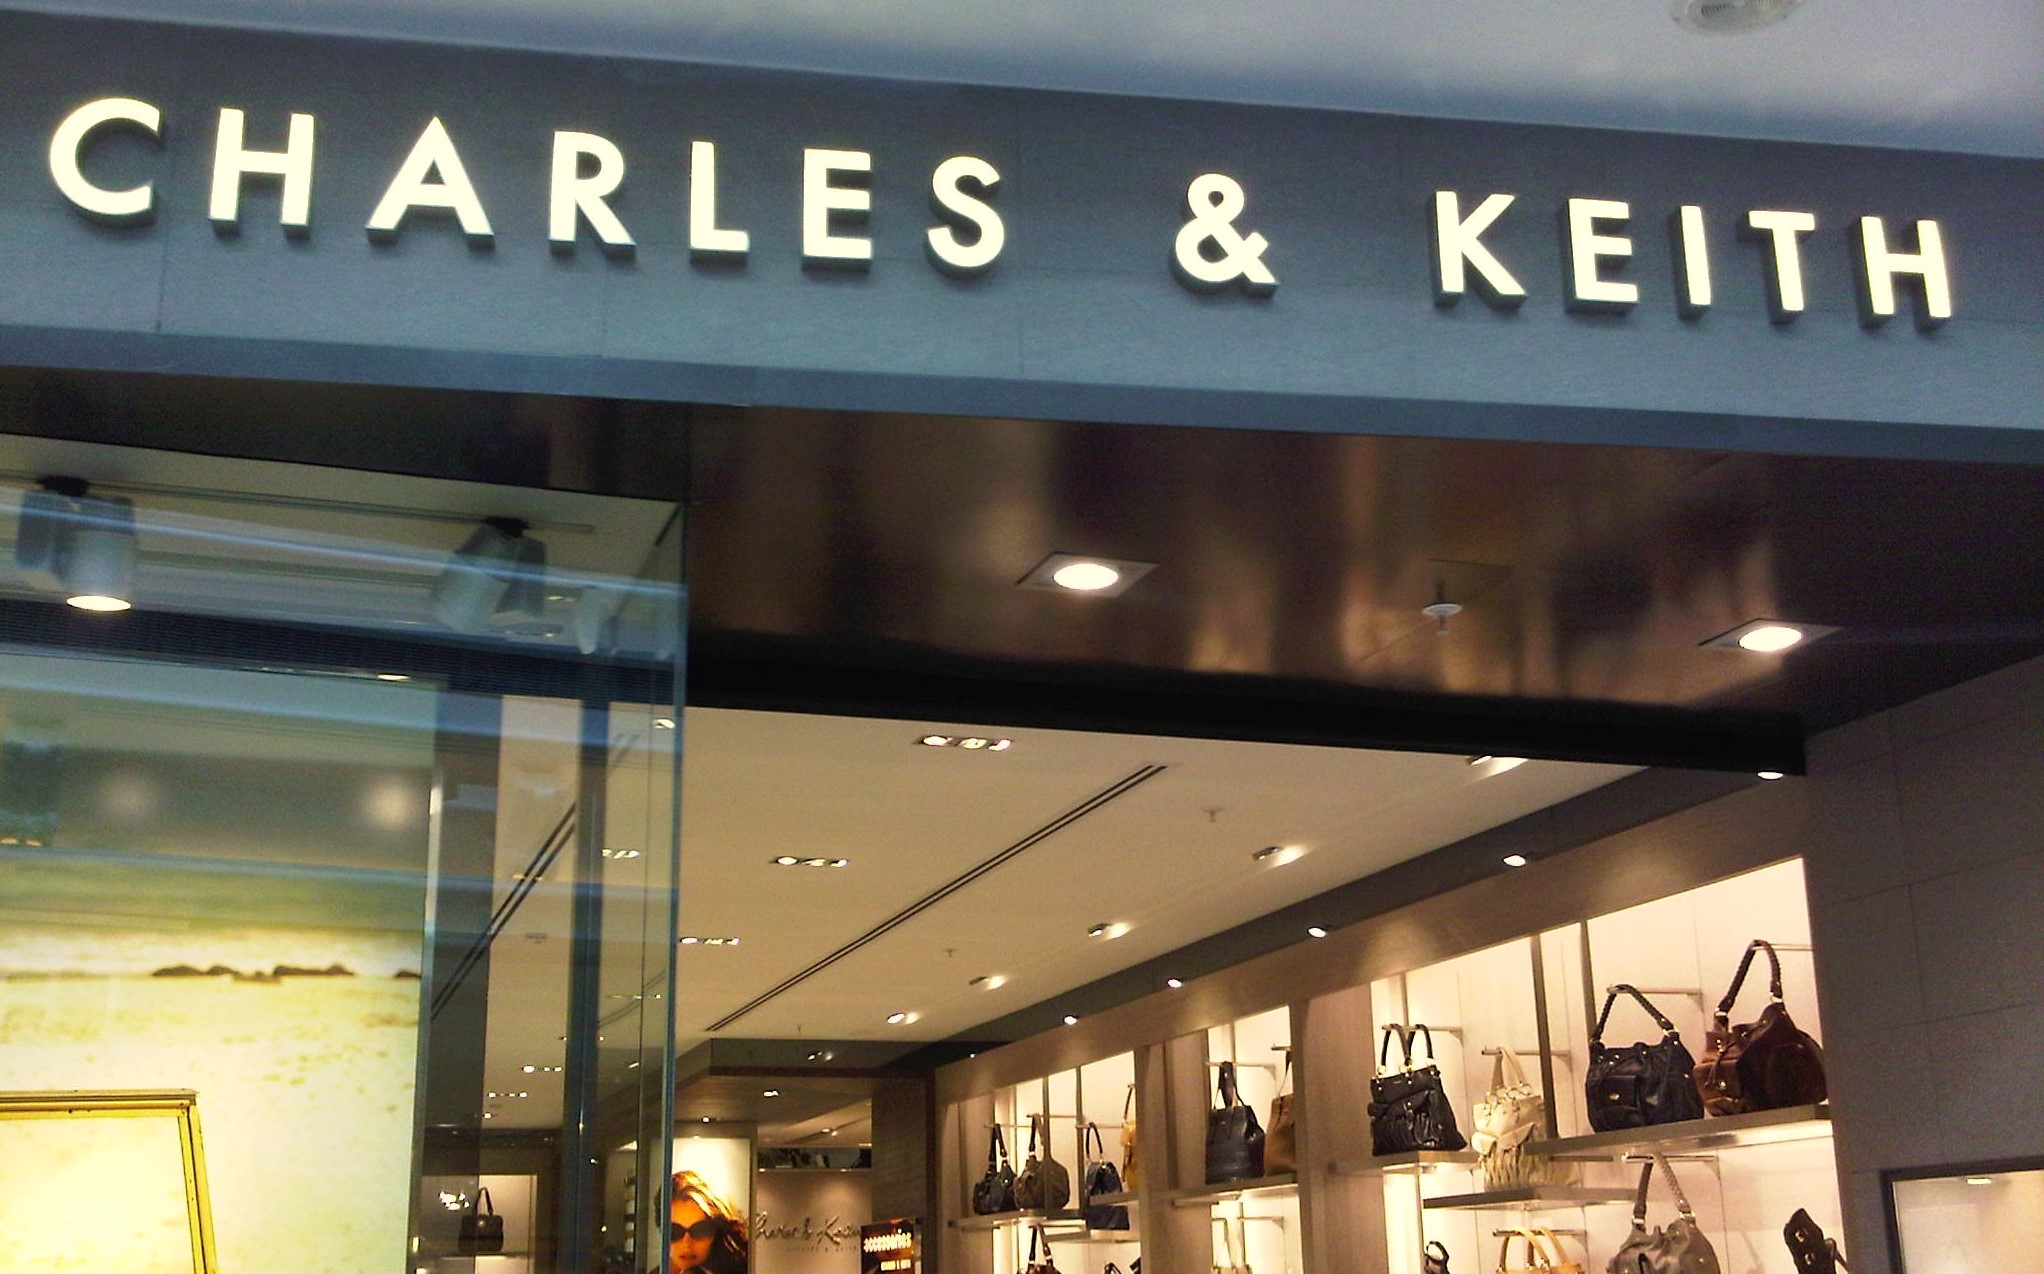 CHARLES & KEITH shares Changi Airport's passion for perfection